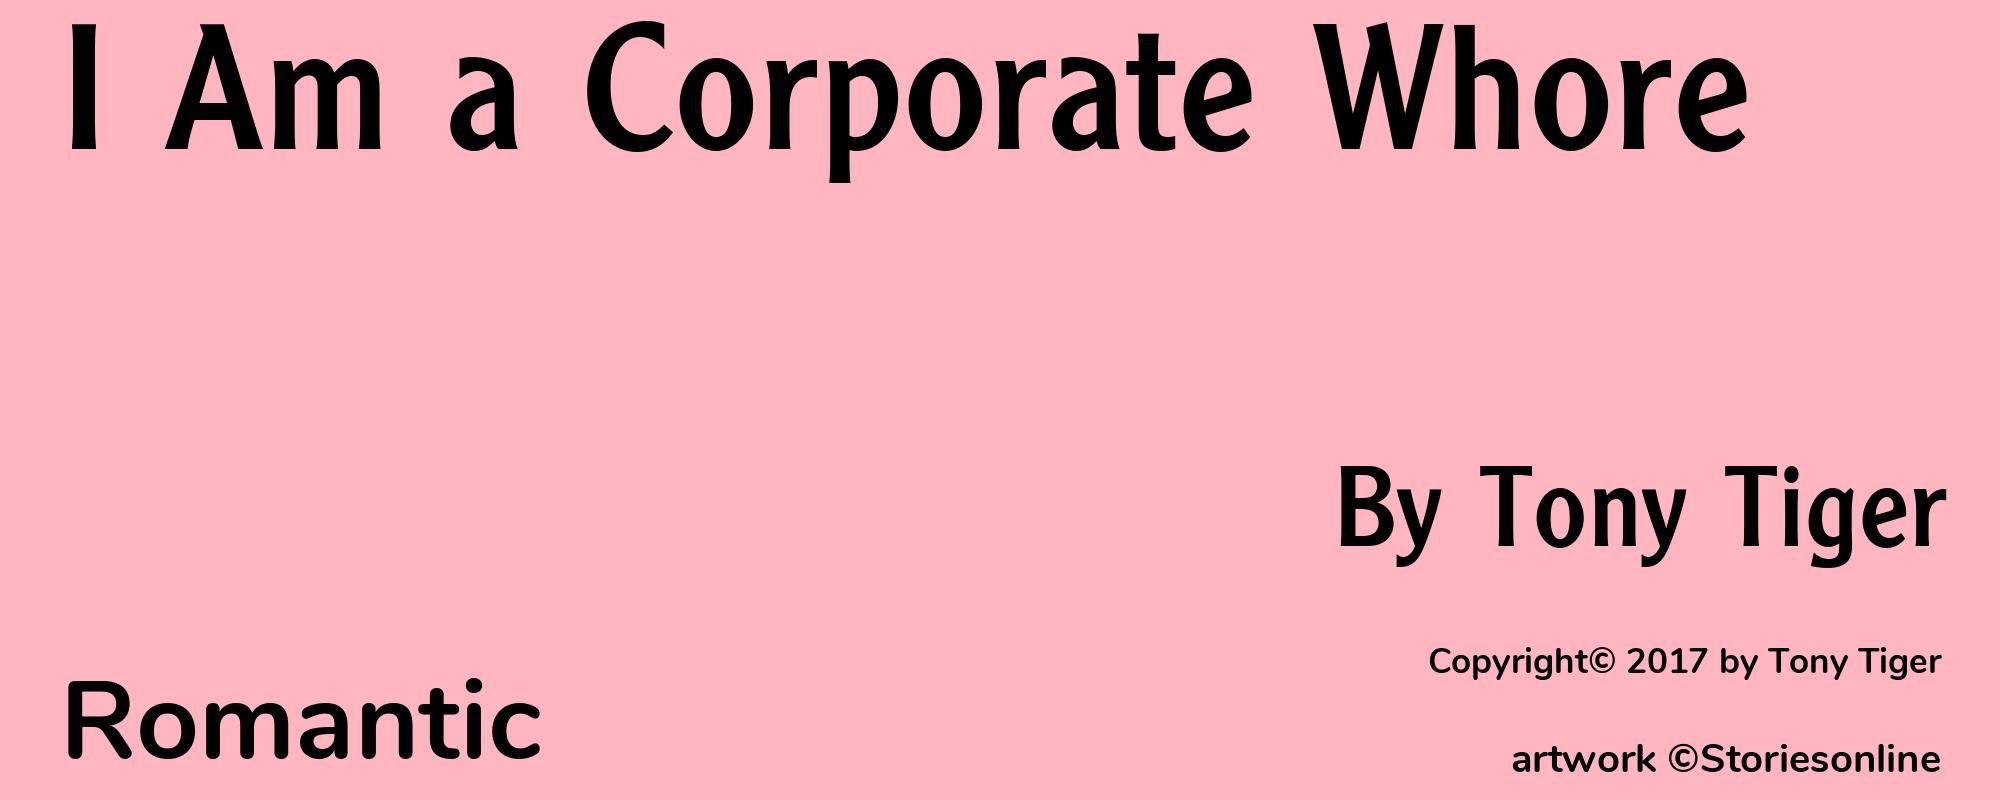 I Am a Corporate Whore - Cover